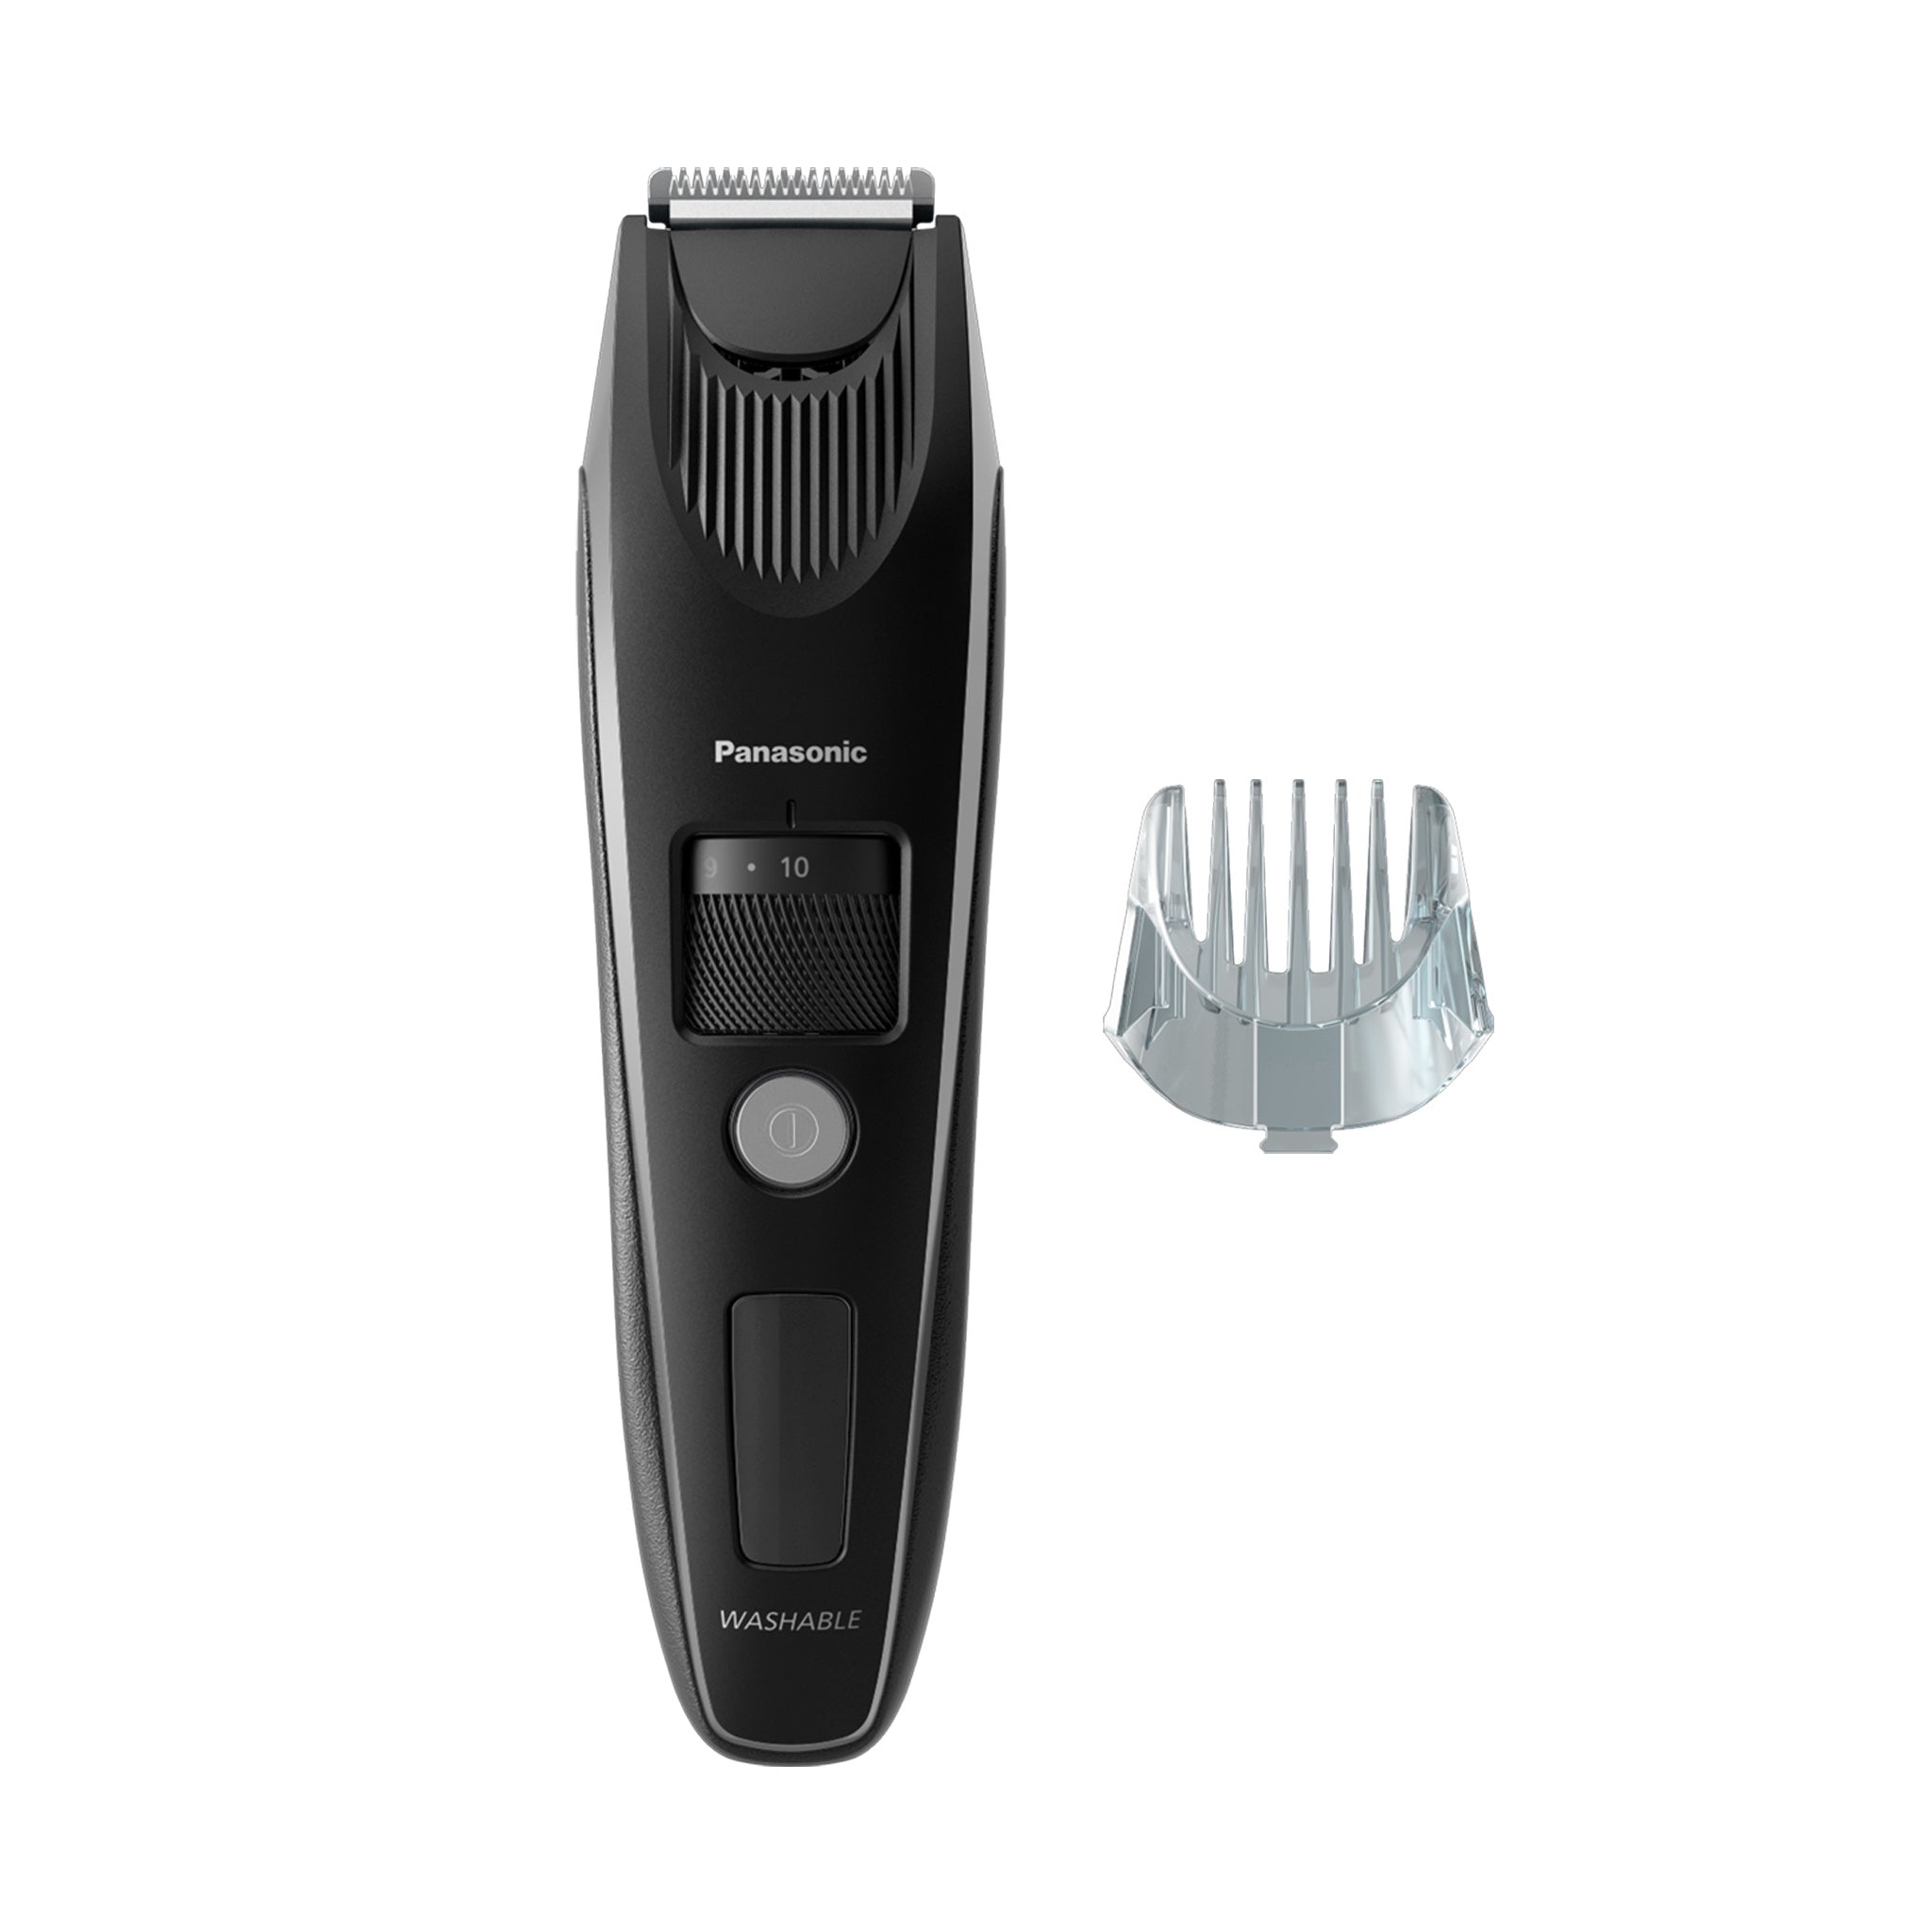 3 Attachments with ER-GK60-S Panasonic Body Comb - Groomer Hair